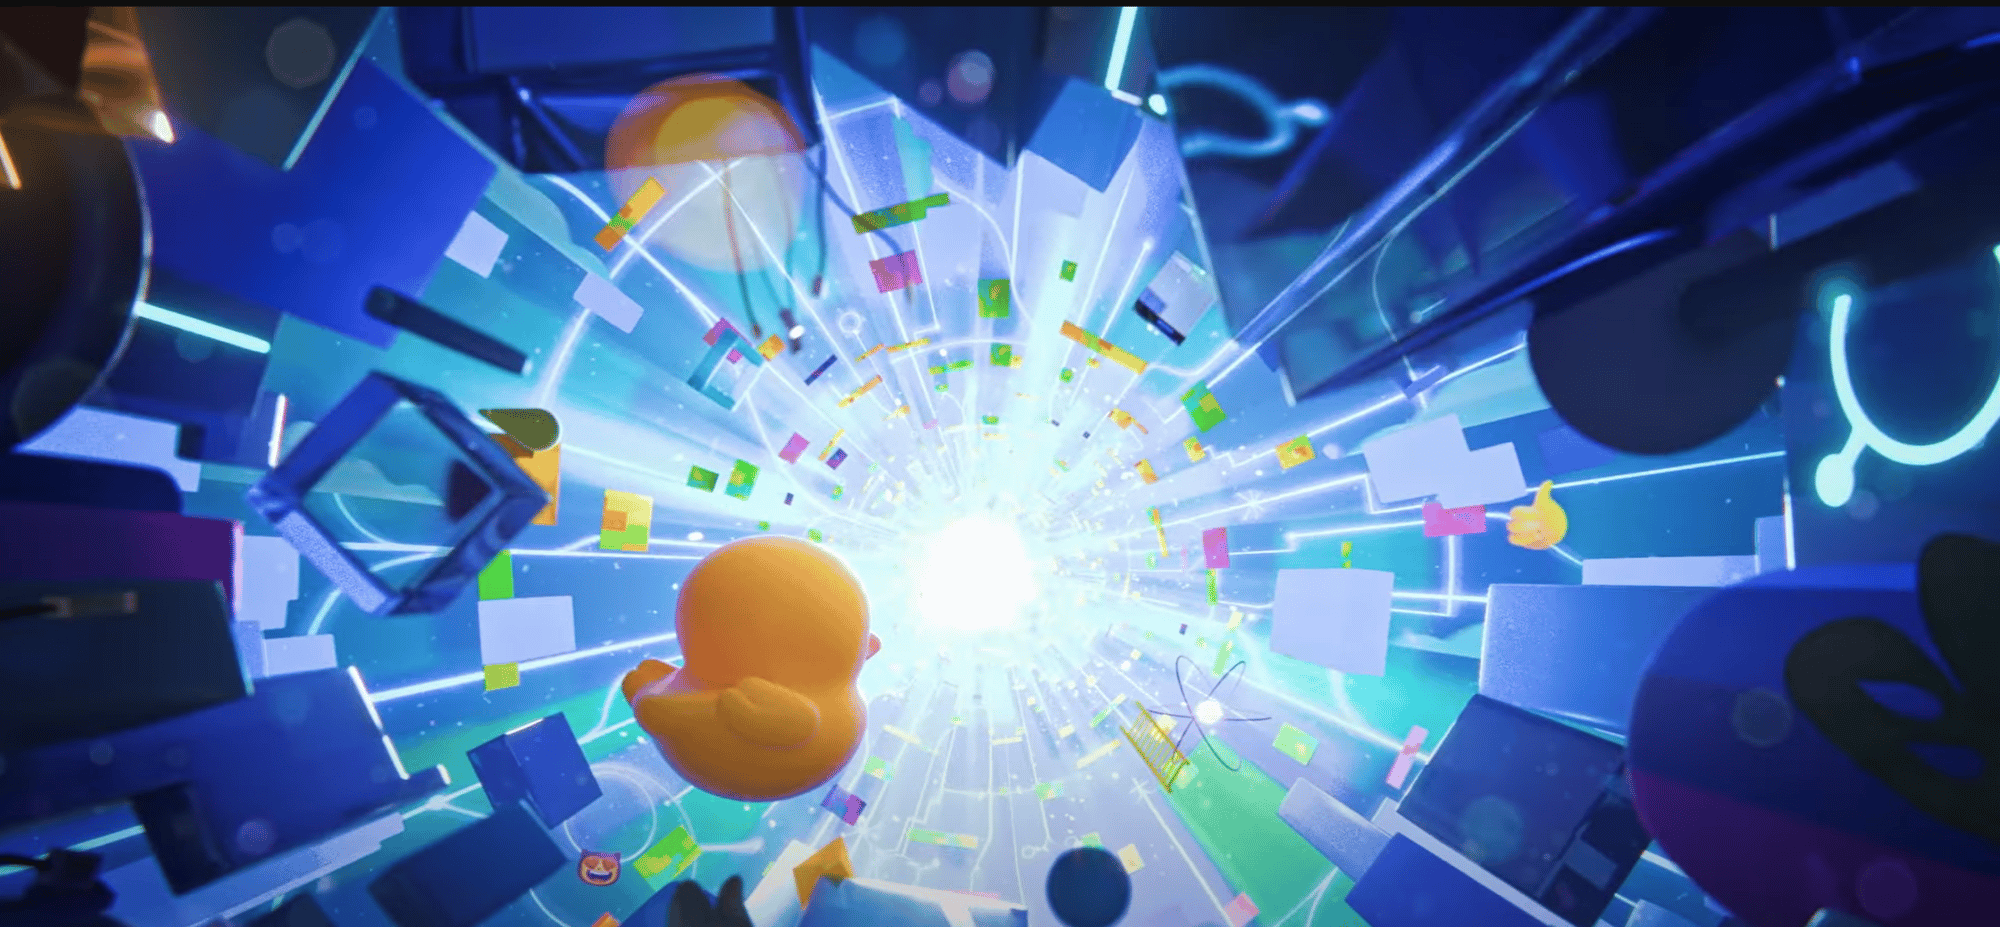 A yellow rubber duck moves through a tunnel of light. Abstract and colourful shapes surround it. 